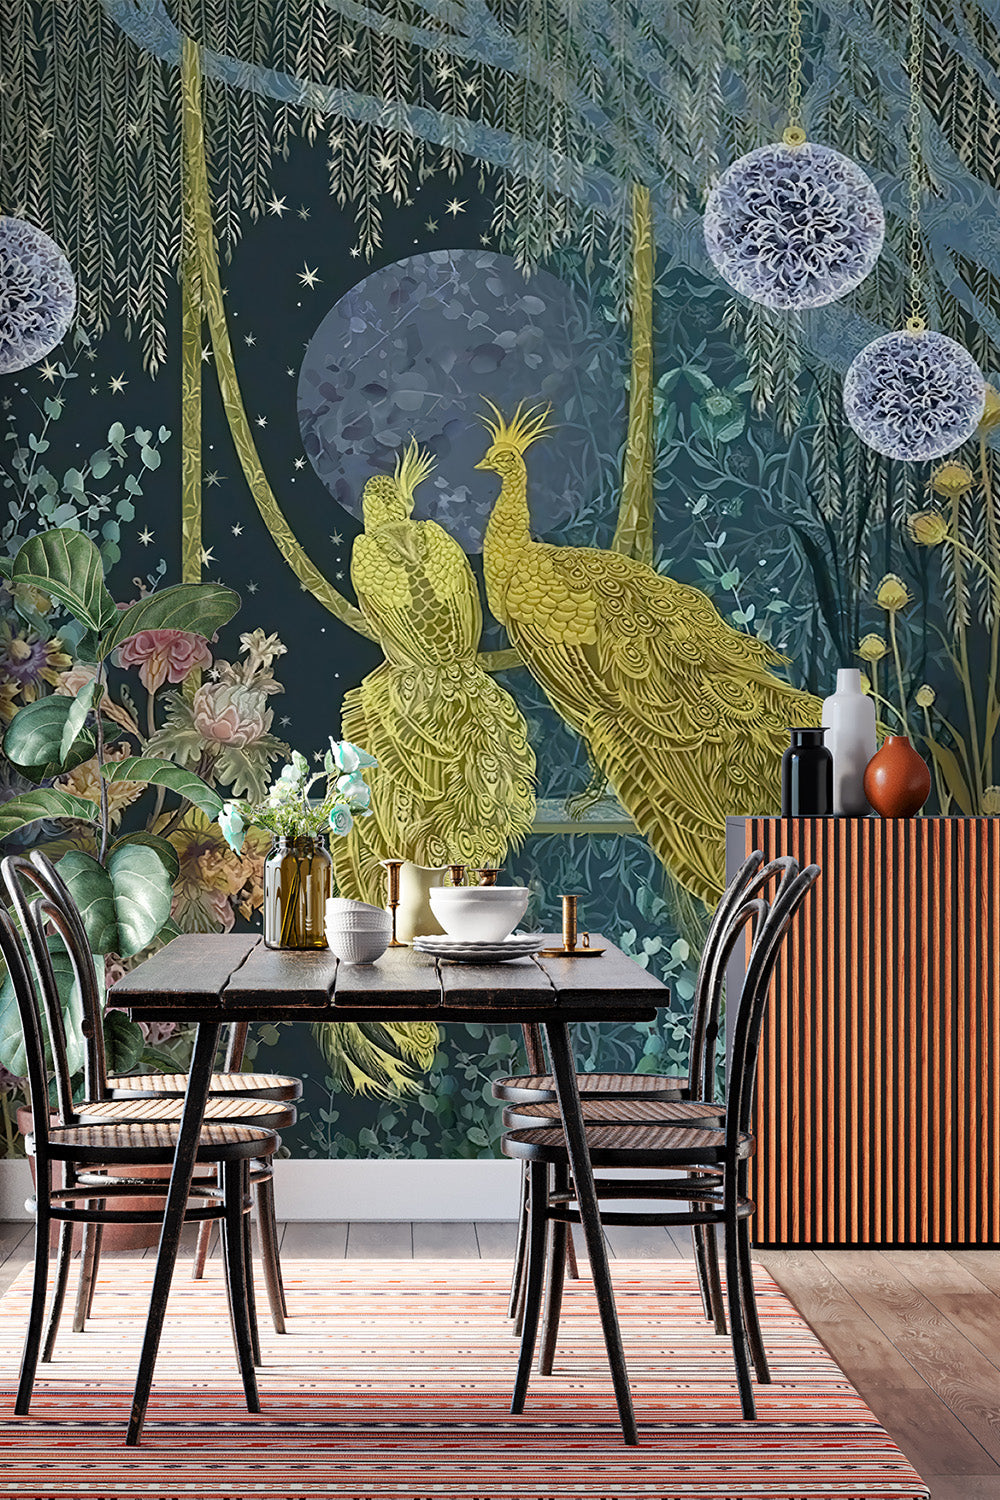 Forest Night Gold Peacock Wallpaper Mural, Trees Forest Green Wallpaper, Self-Adhesive Peel And Stick 3D Wall Mural,Removable Designer Wall Decor